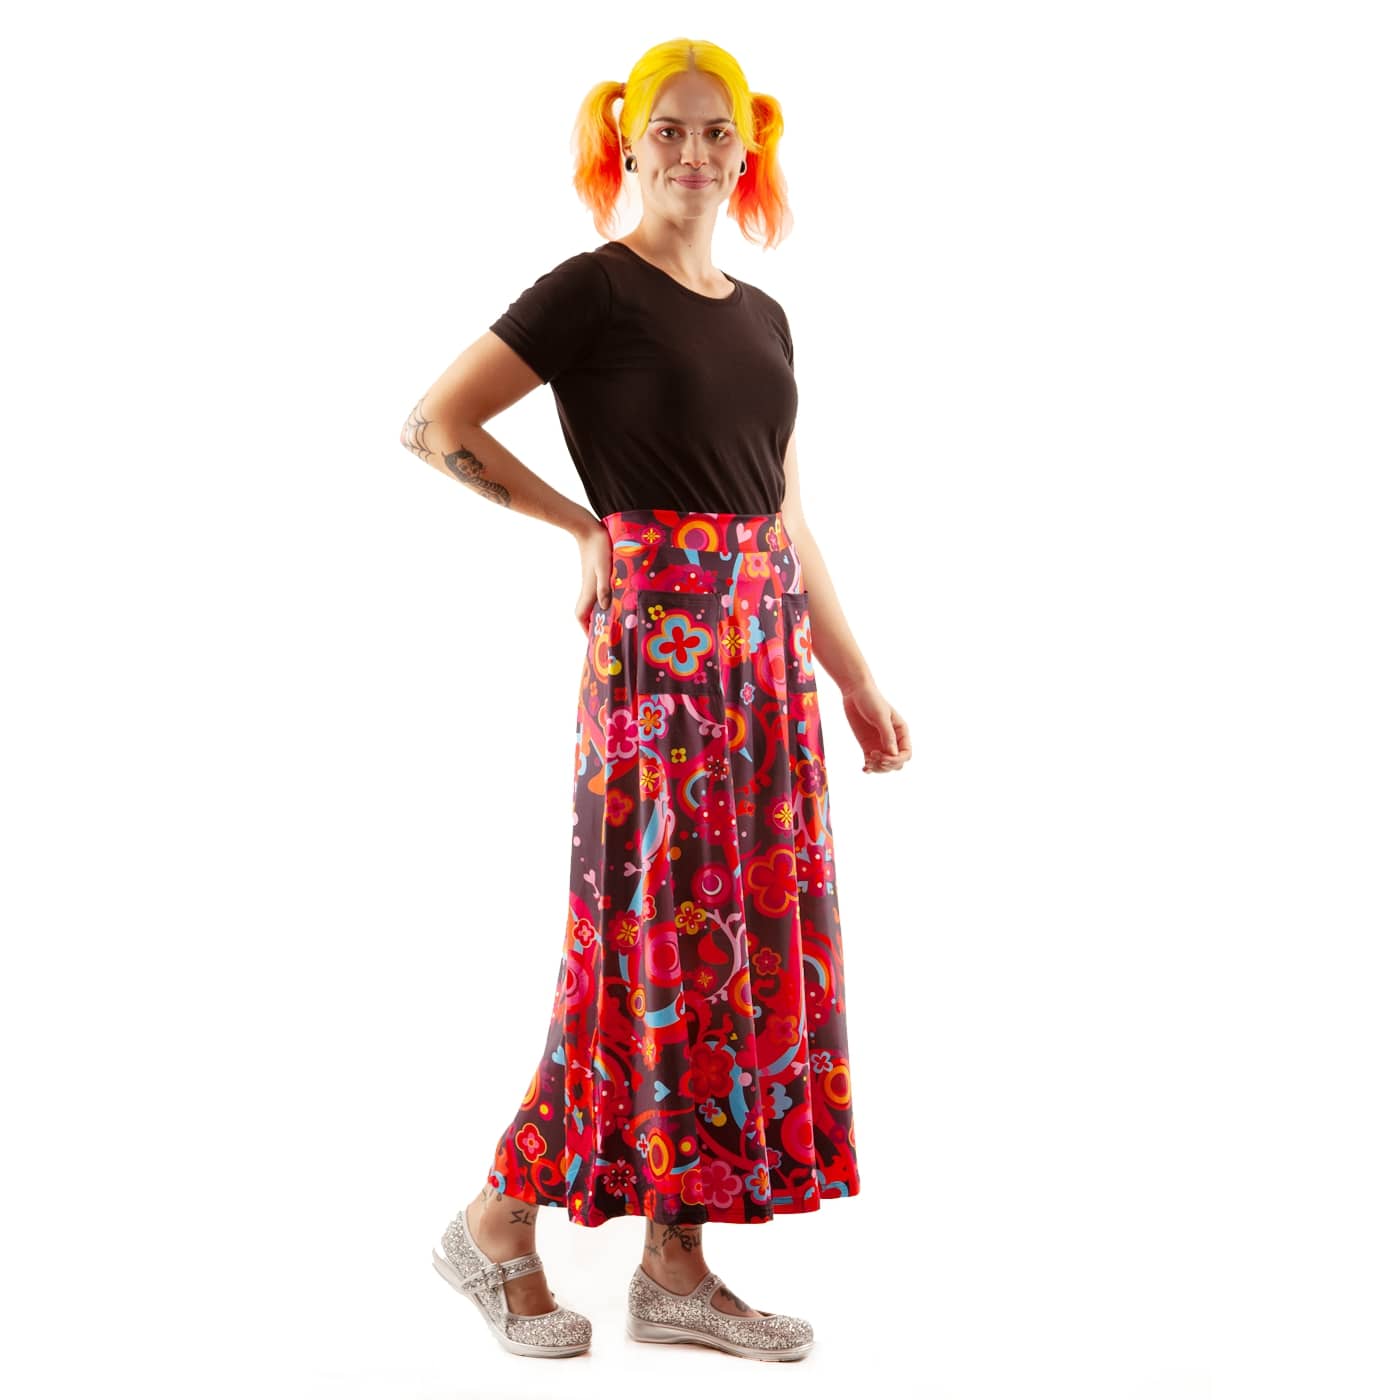 Groovy Maxi Skirt by RainbowsAndFairies.com.au (Flower Power - Psychedelic - Woodstock - Skirt With Pockets - Boho - Mod Retro - Vintage Inspired) - SKU: CL_MAXIS_GROOV_ORG - Pic-04